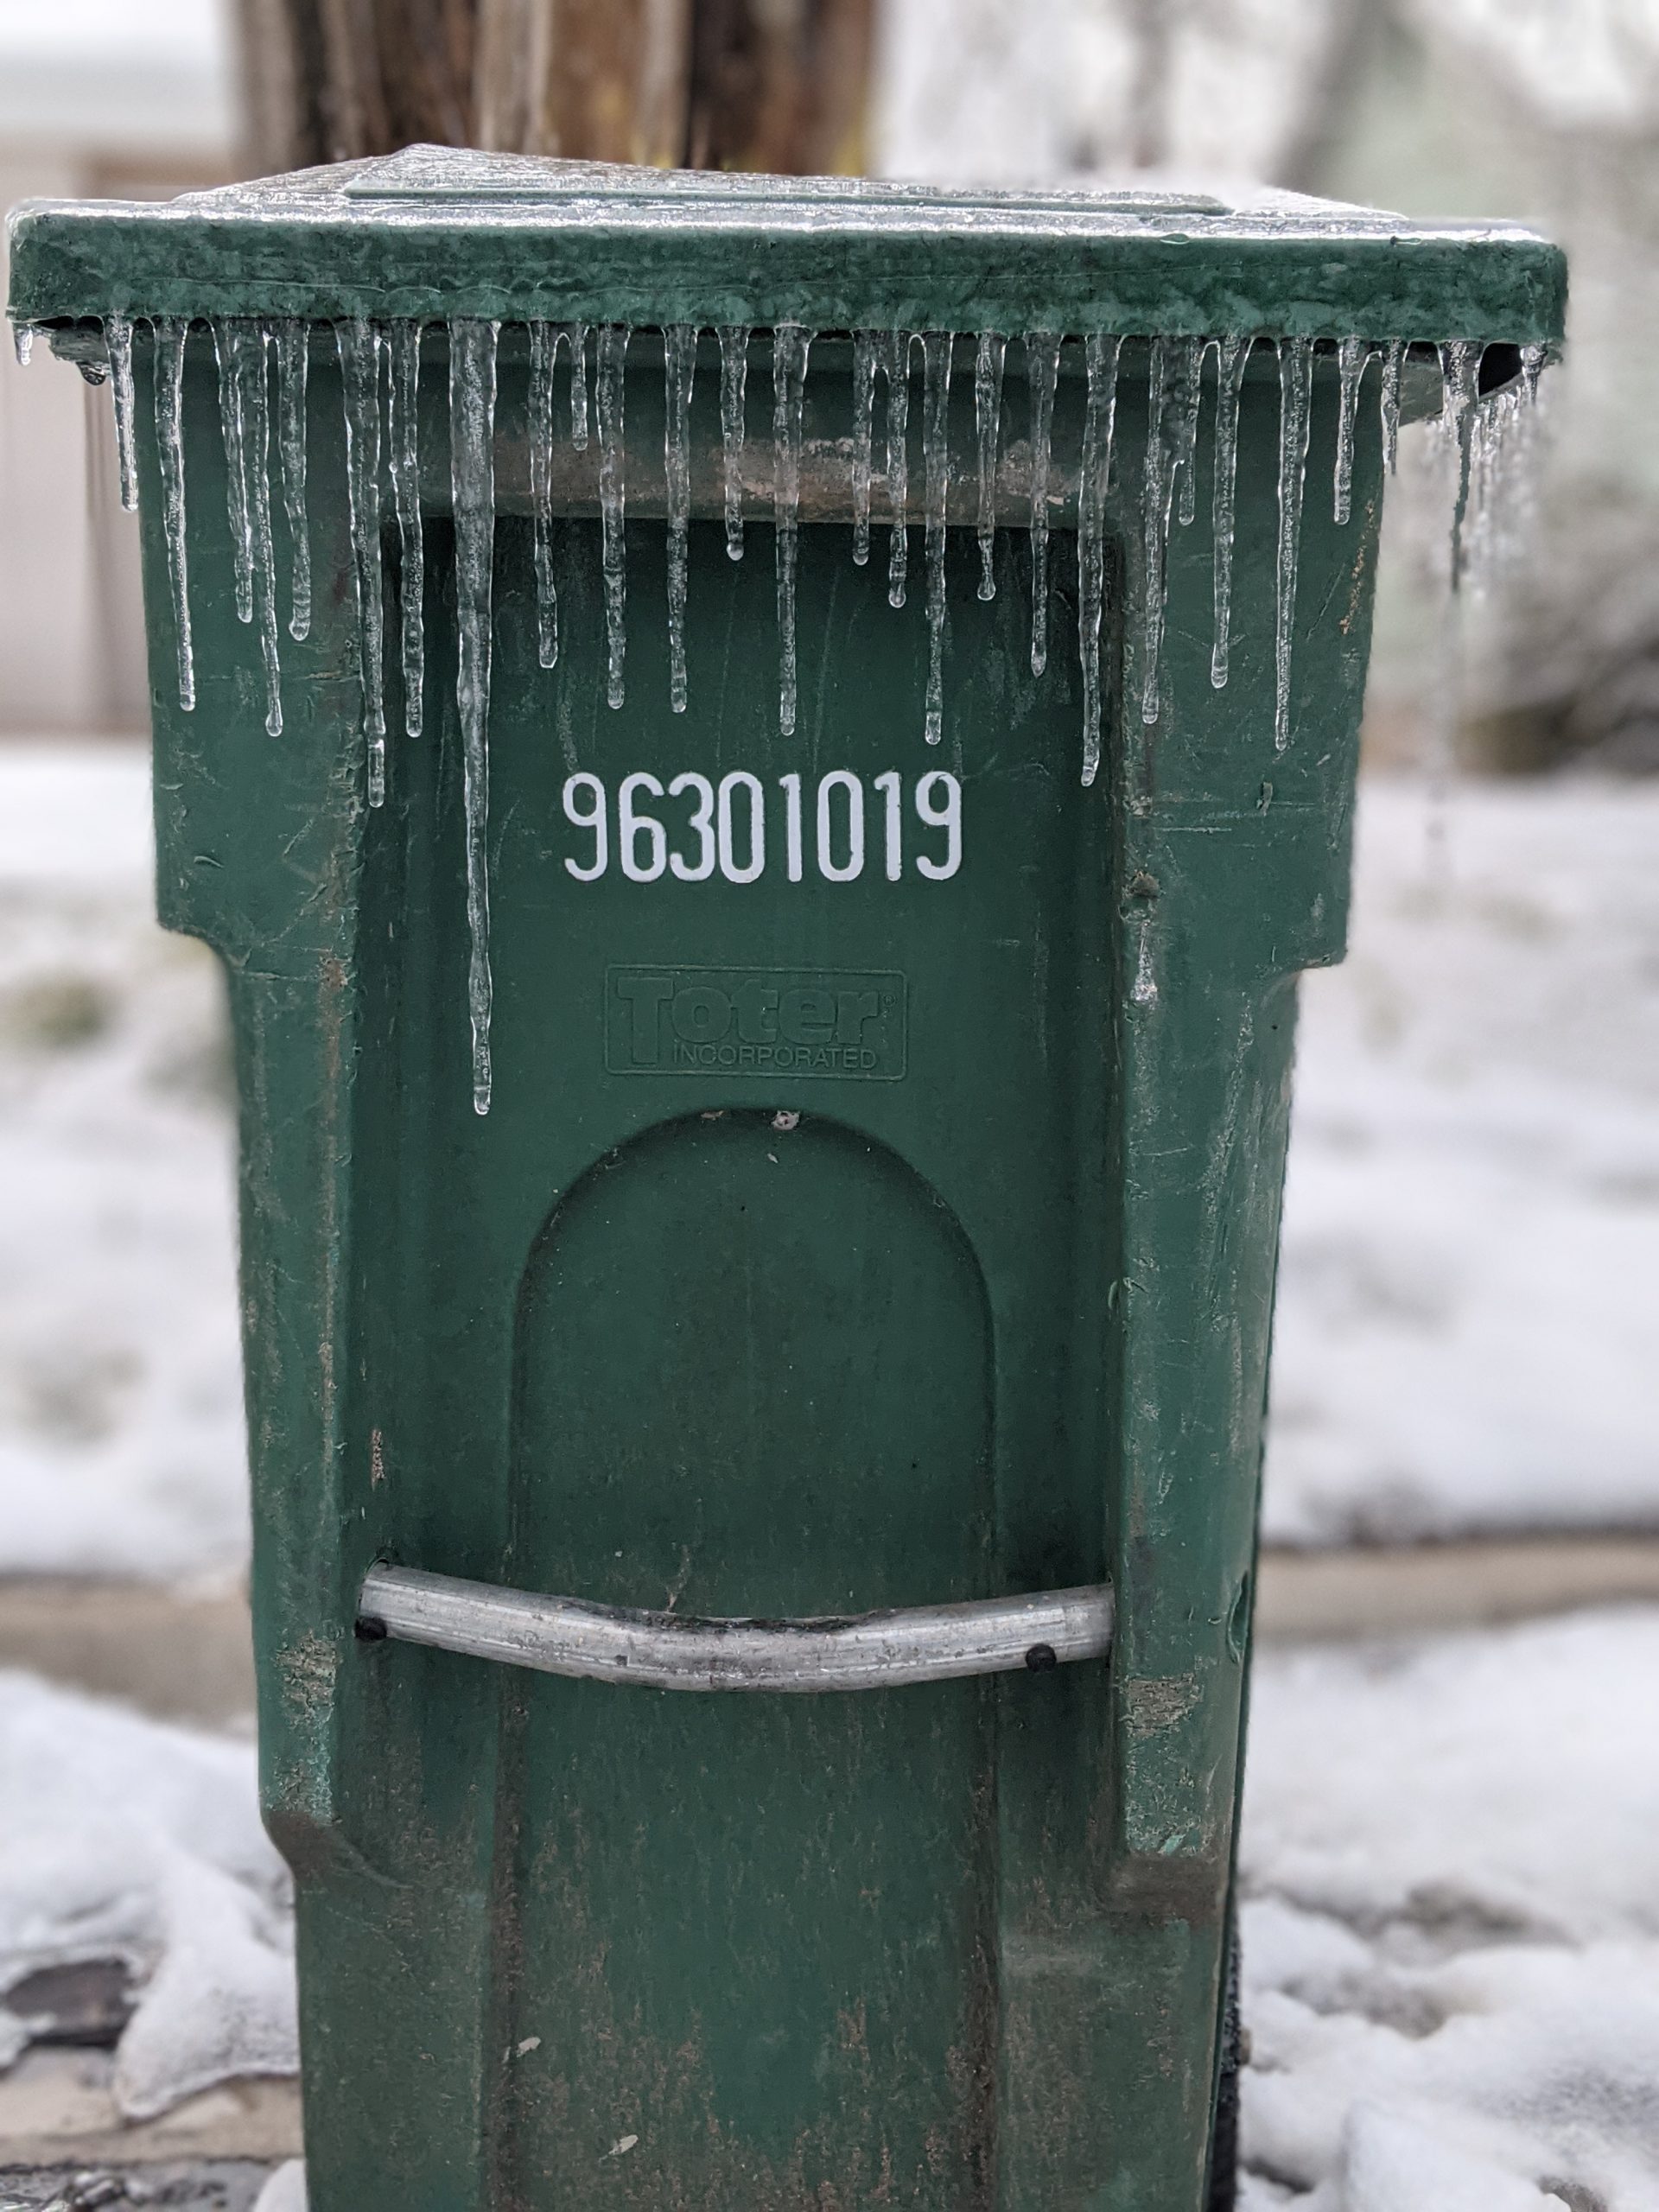 Garbage can with icicles hanging from the lid